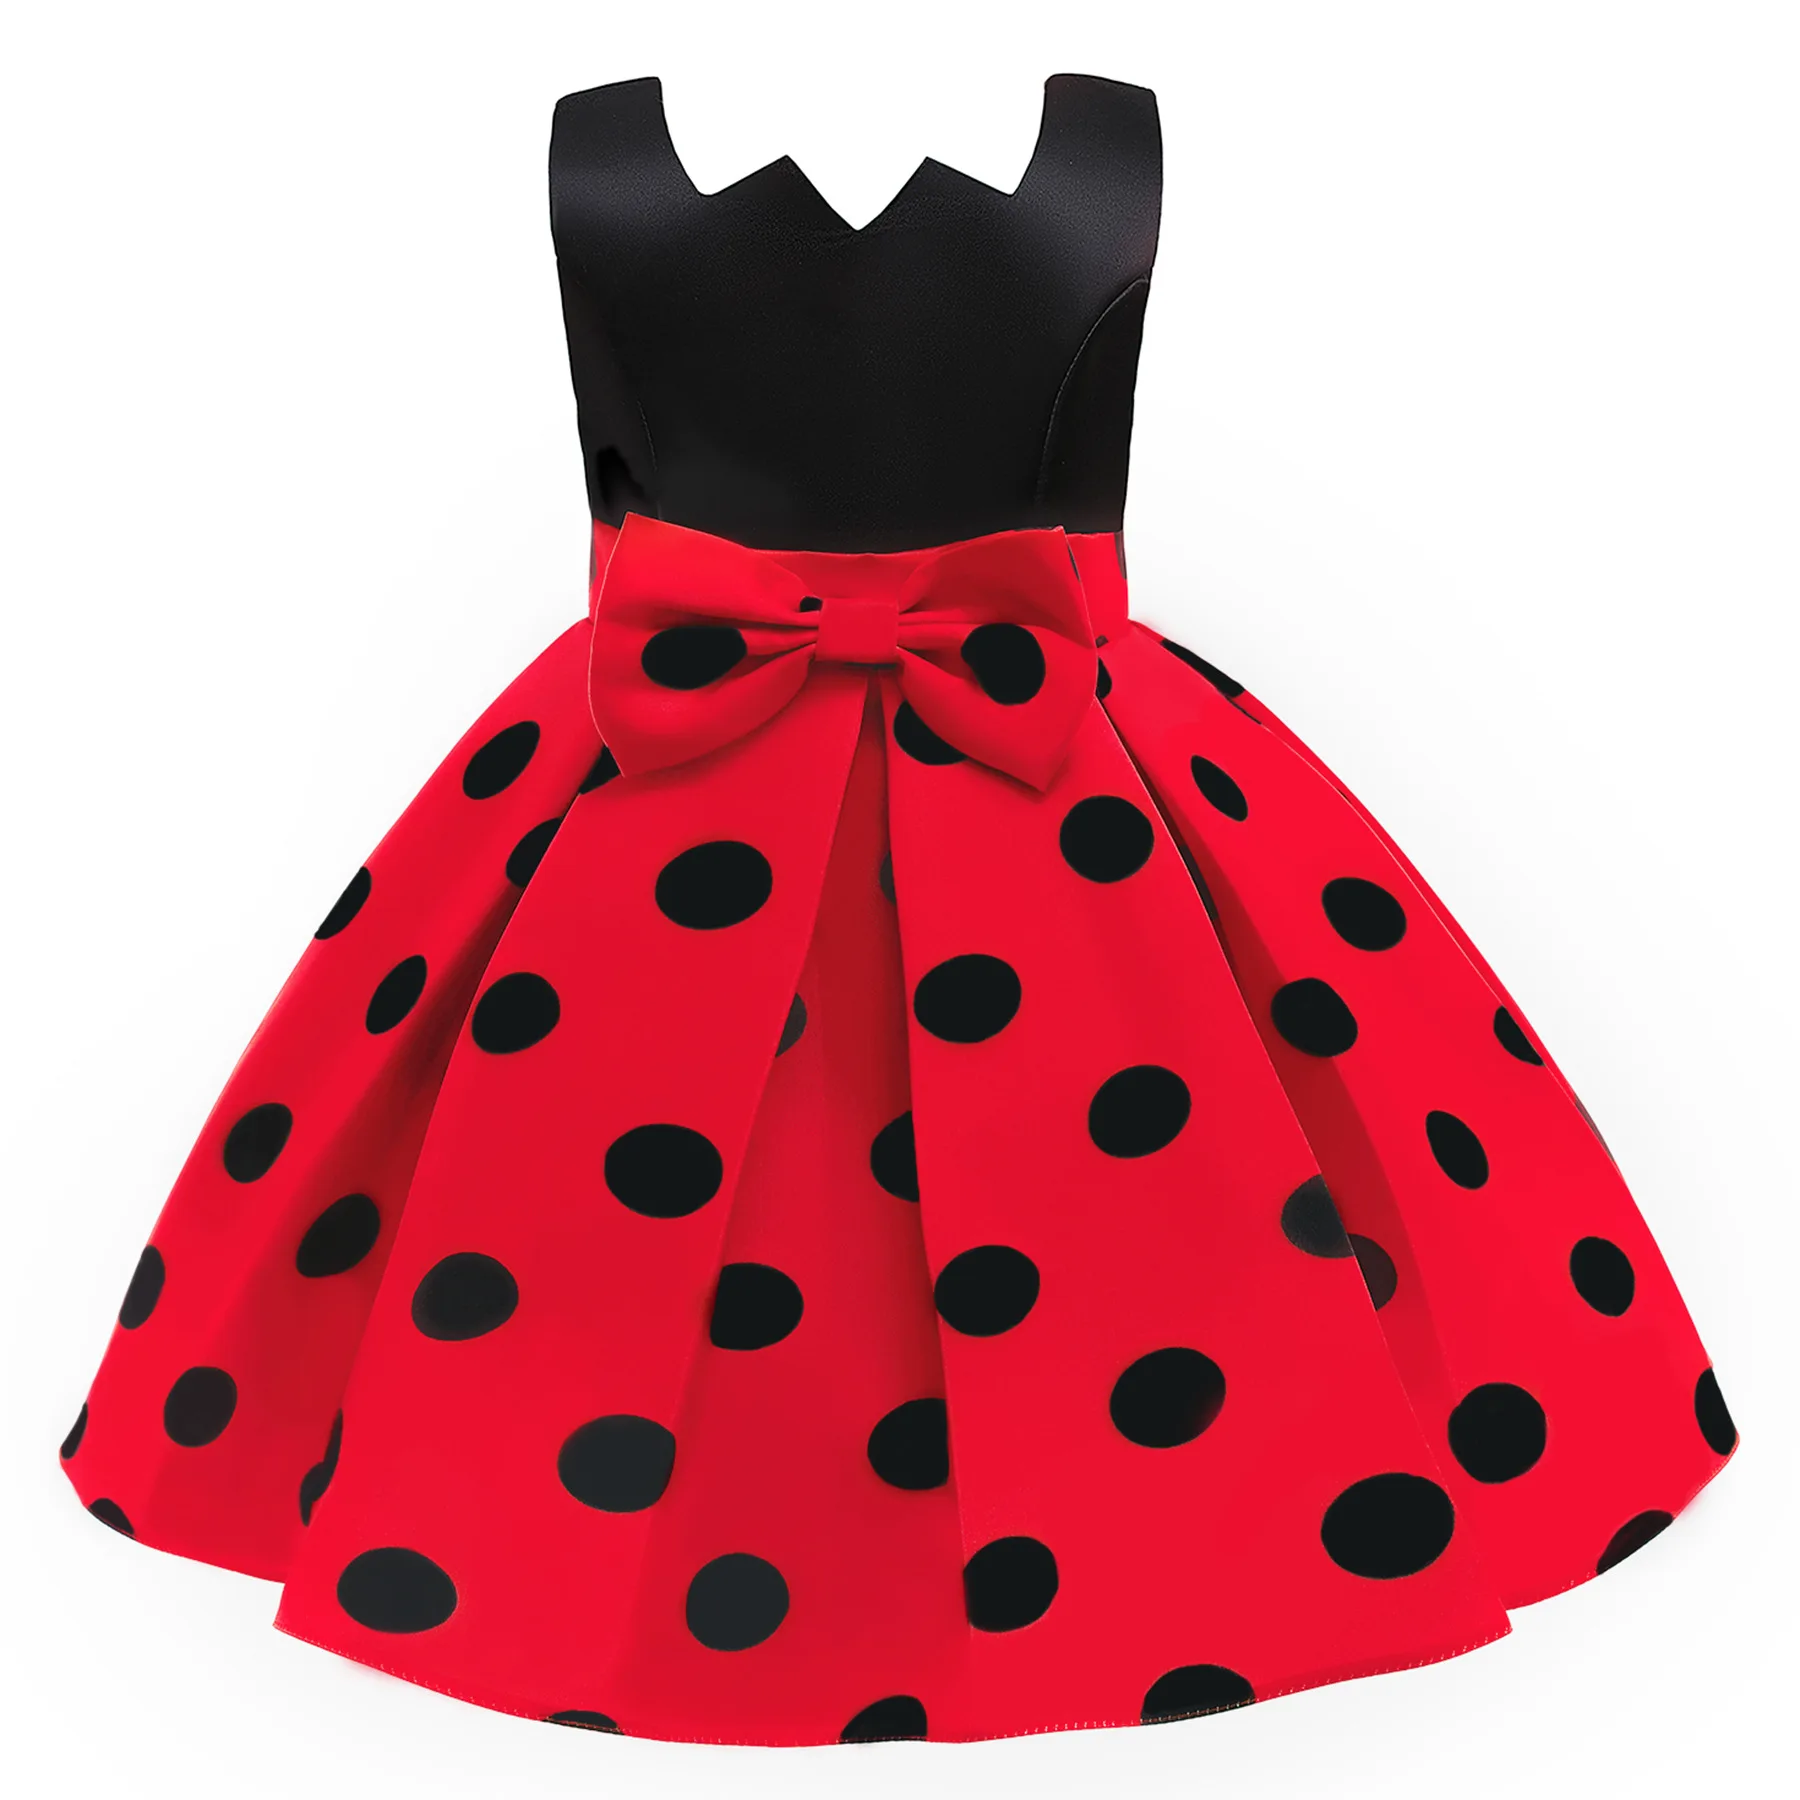 

New Fancy Polka Dot Dresses for Girls, Carnival Costumes, Cosplay Clothes, Birthday Party, Evening Occasions, Halloween, Baby